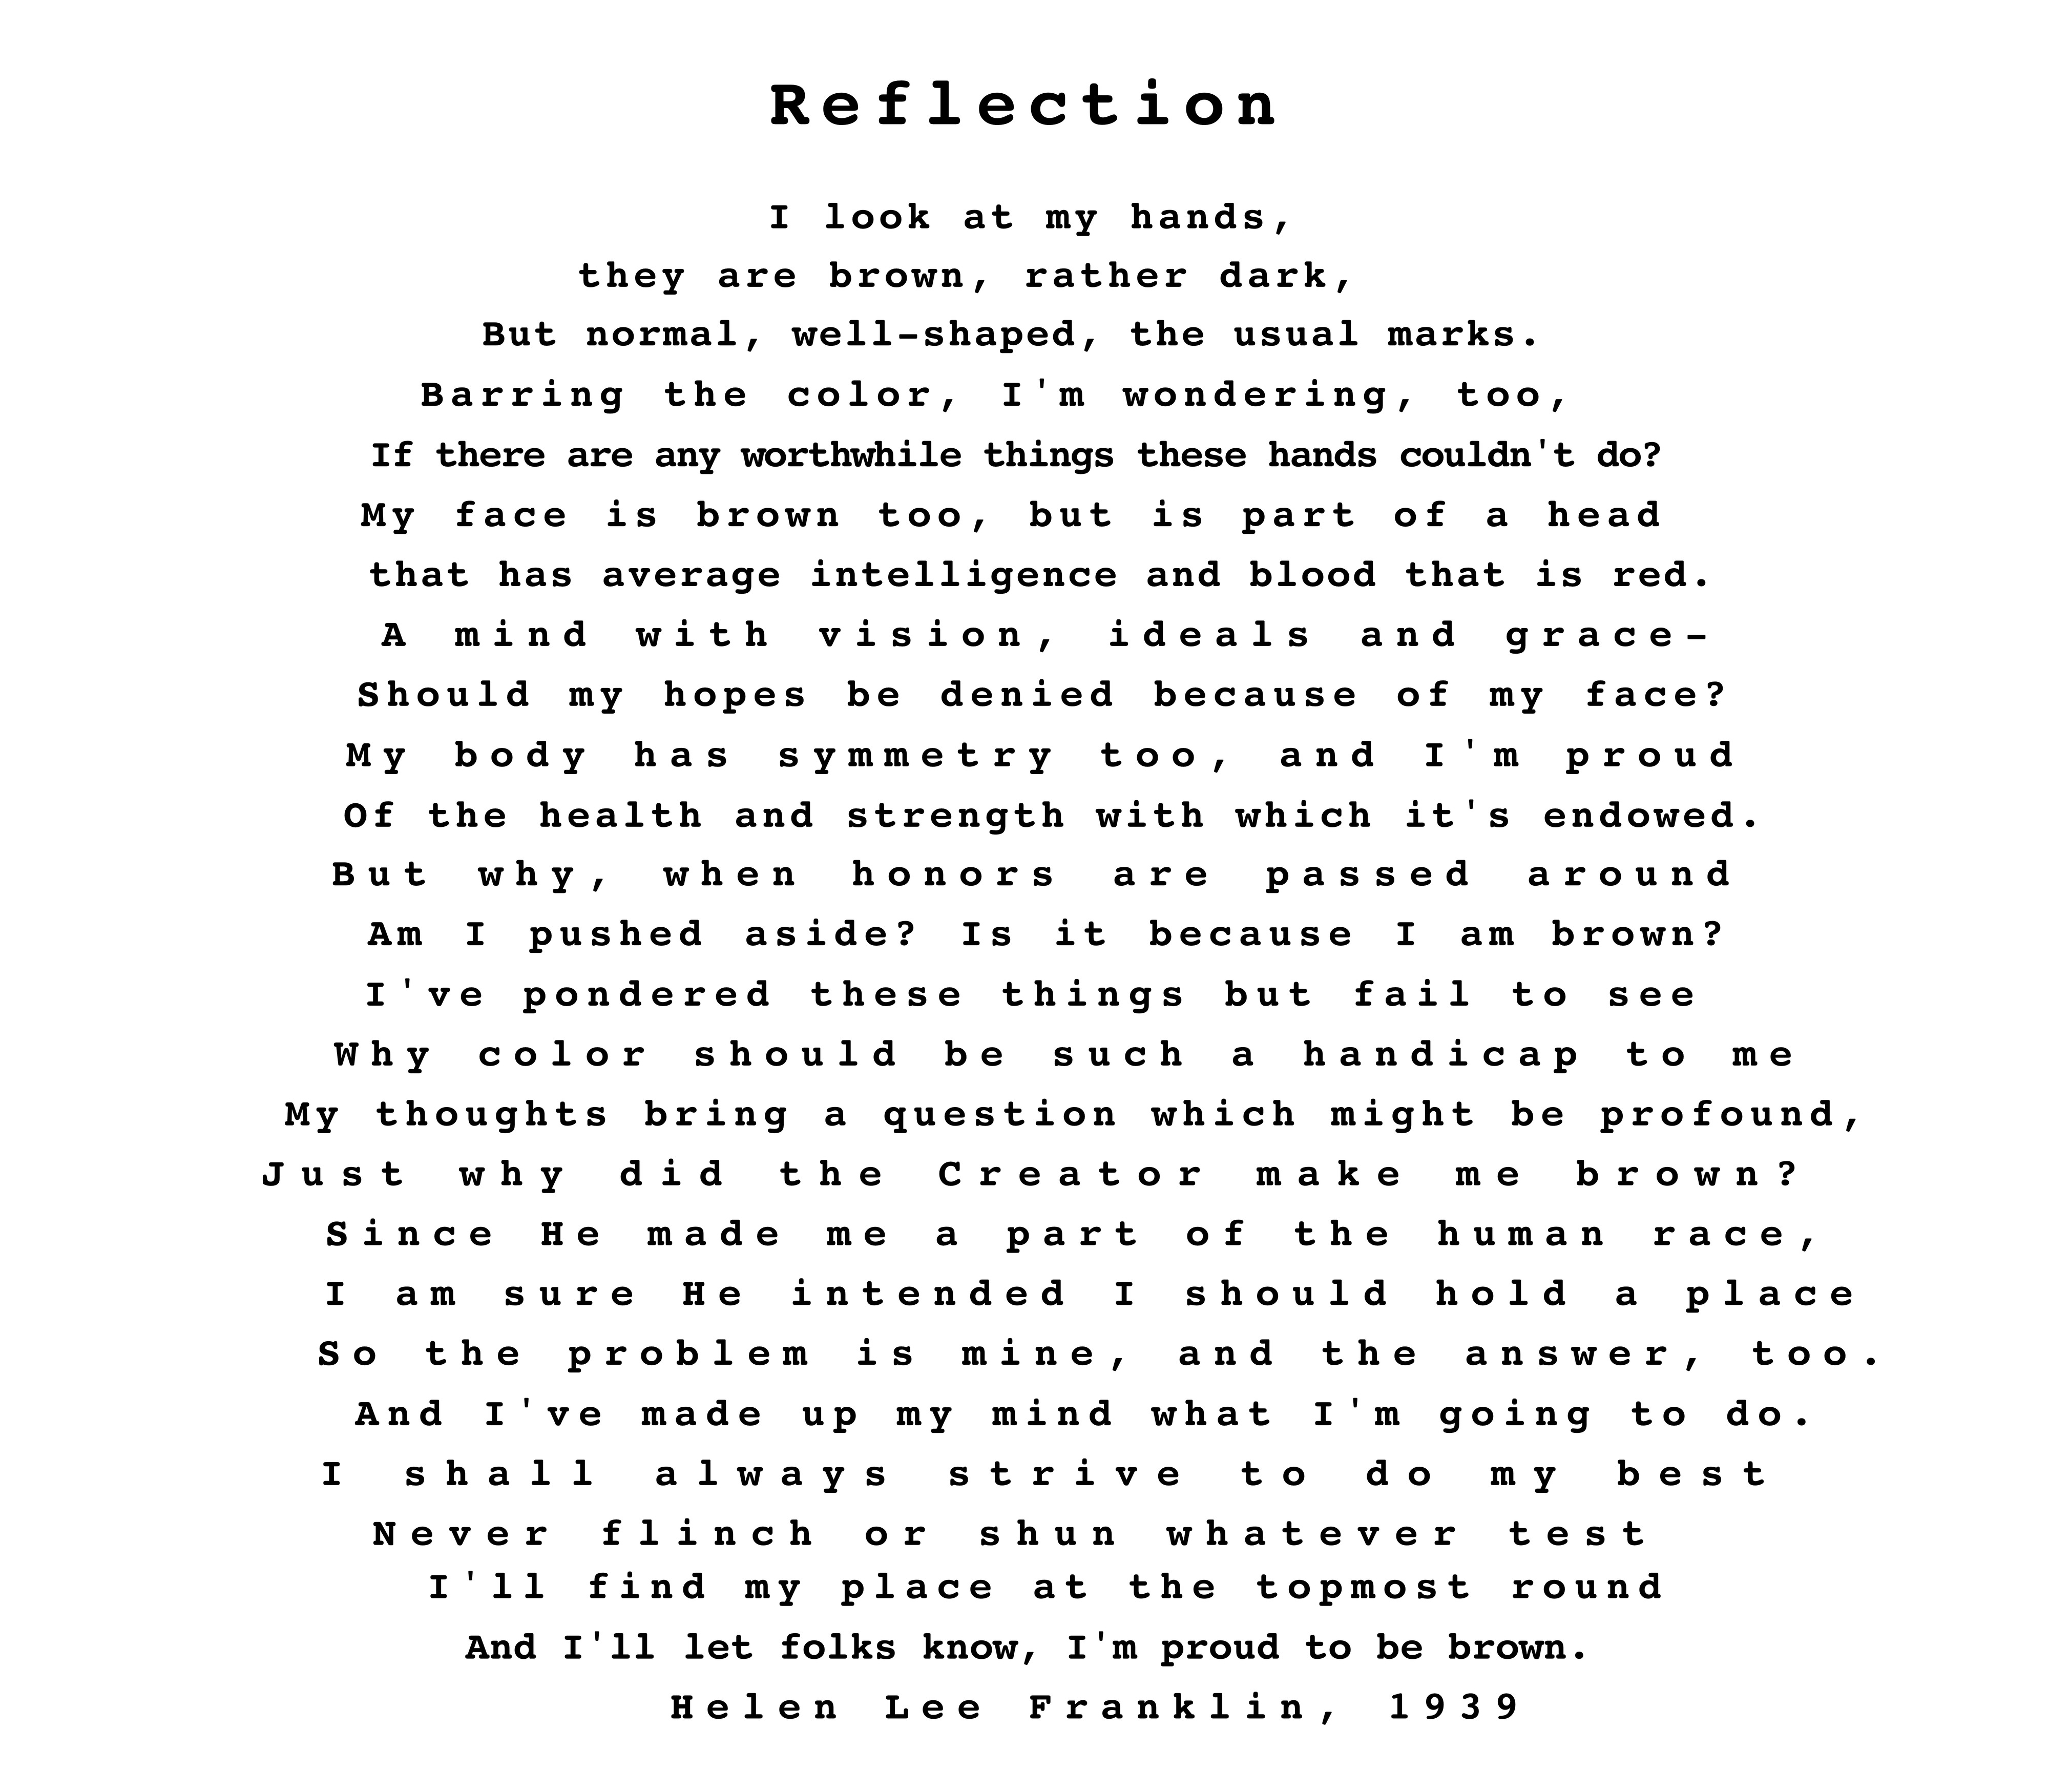 Graphic rendering of Helen Franklin's poem "Reflection" in the shape of a profile.